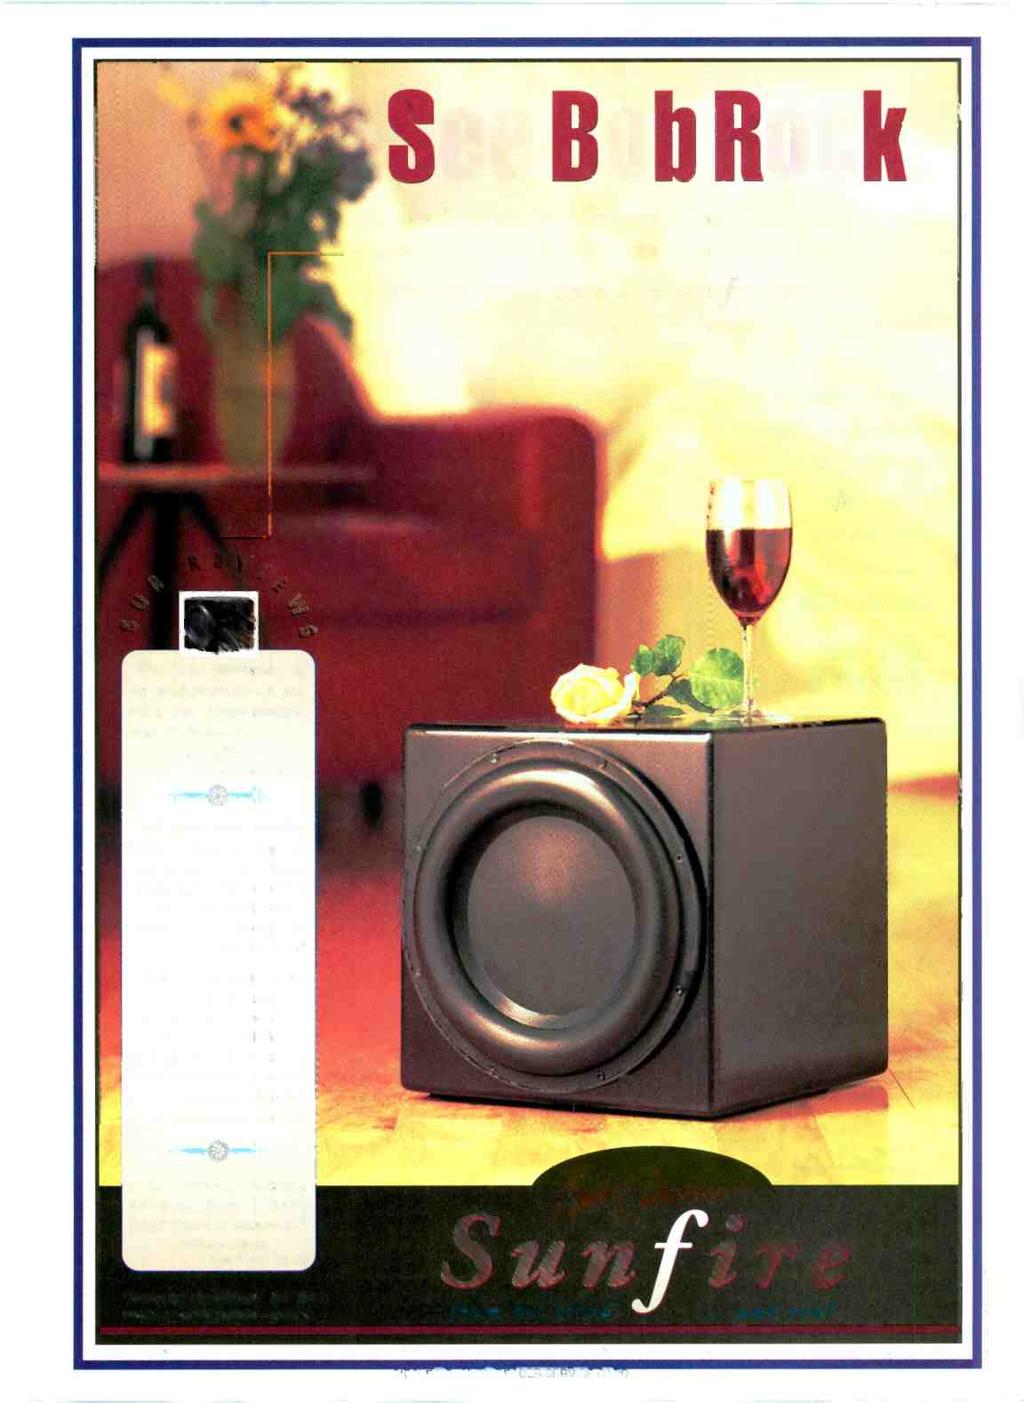 ee Bob Rock. The new Sunfire True Subwoofer by Bob Carver has received reviews that are redefining the subwoofer industry. There has never been a subwoofer like it!